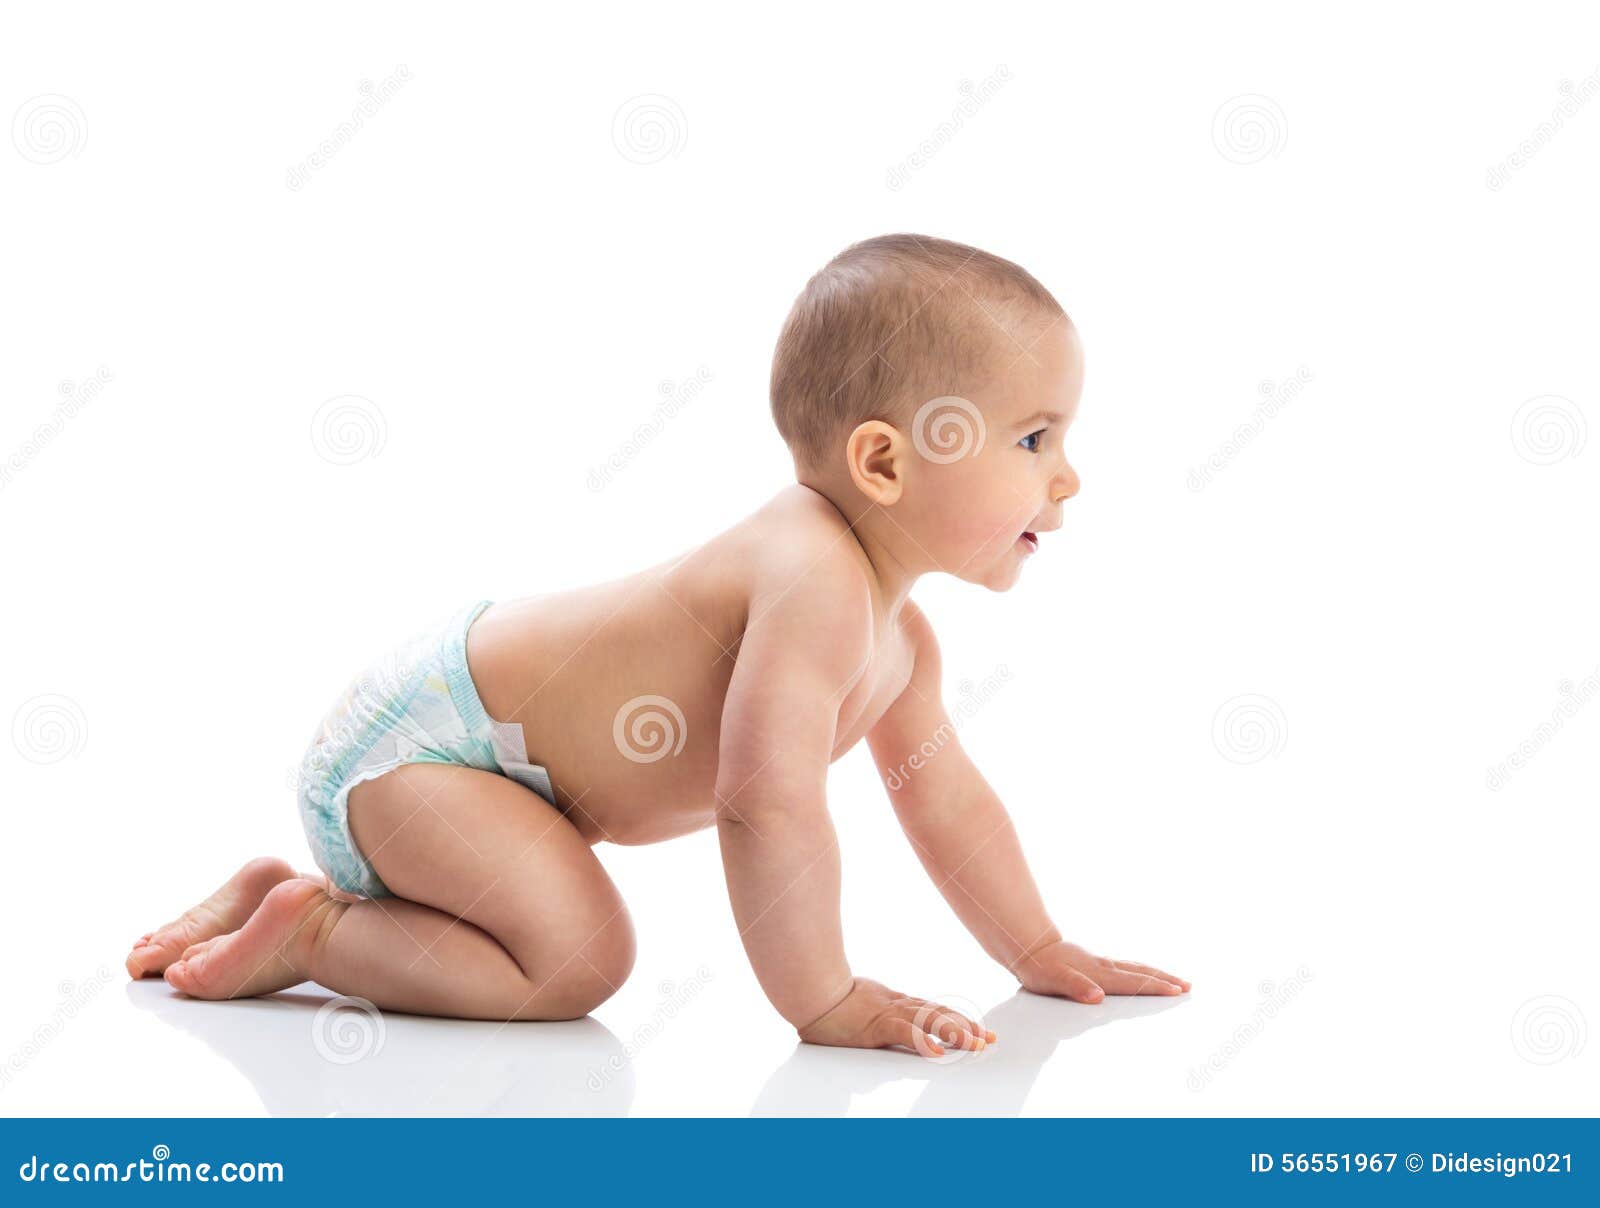 beautiful funny baby learn how to crawling